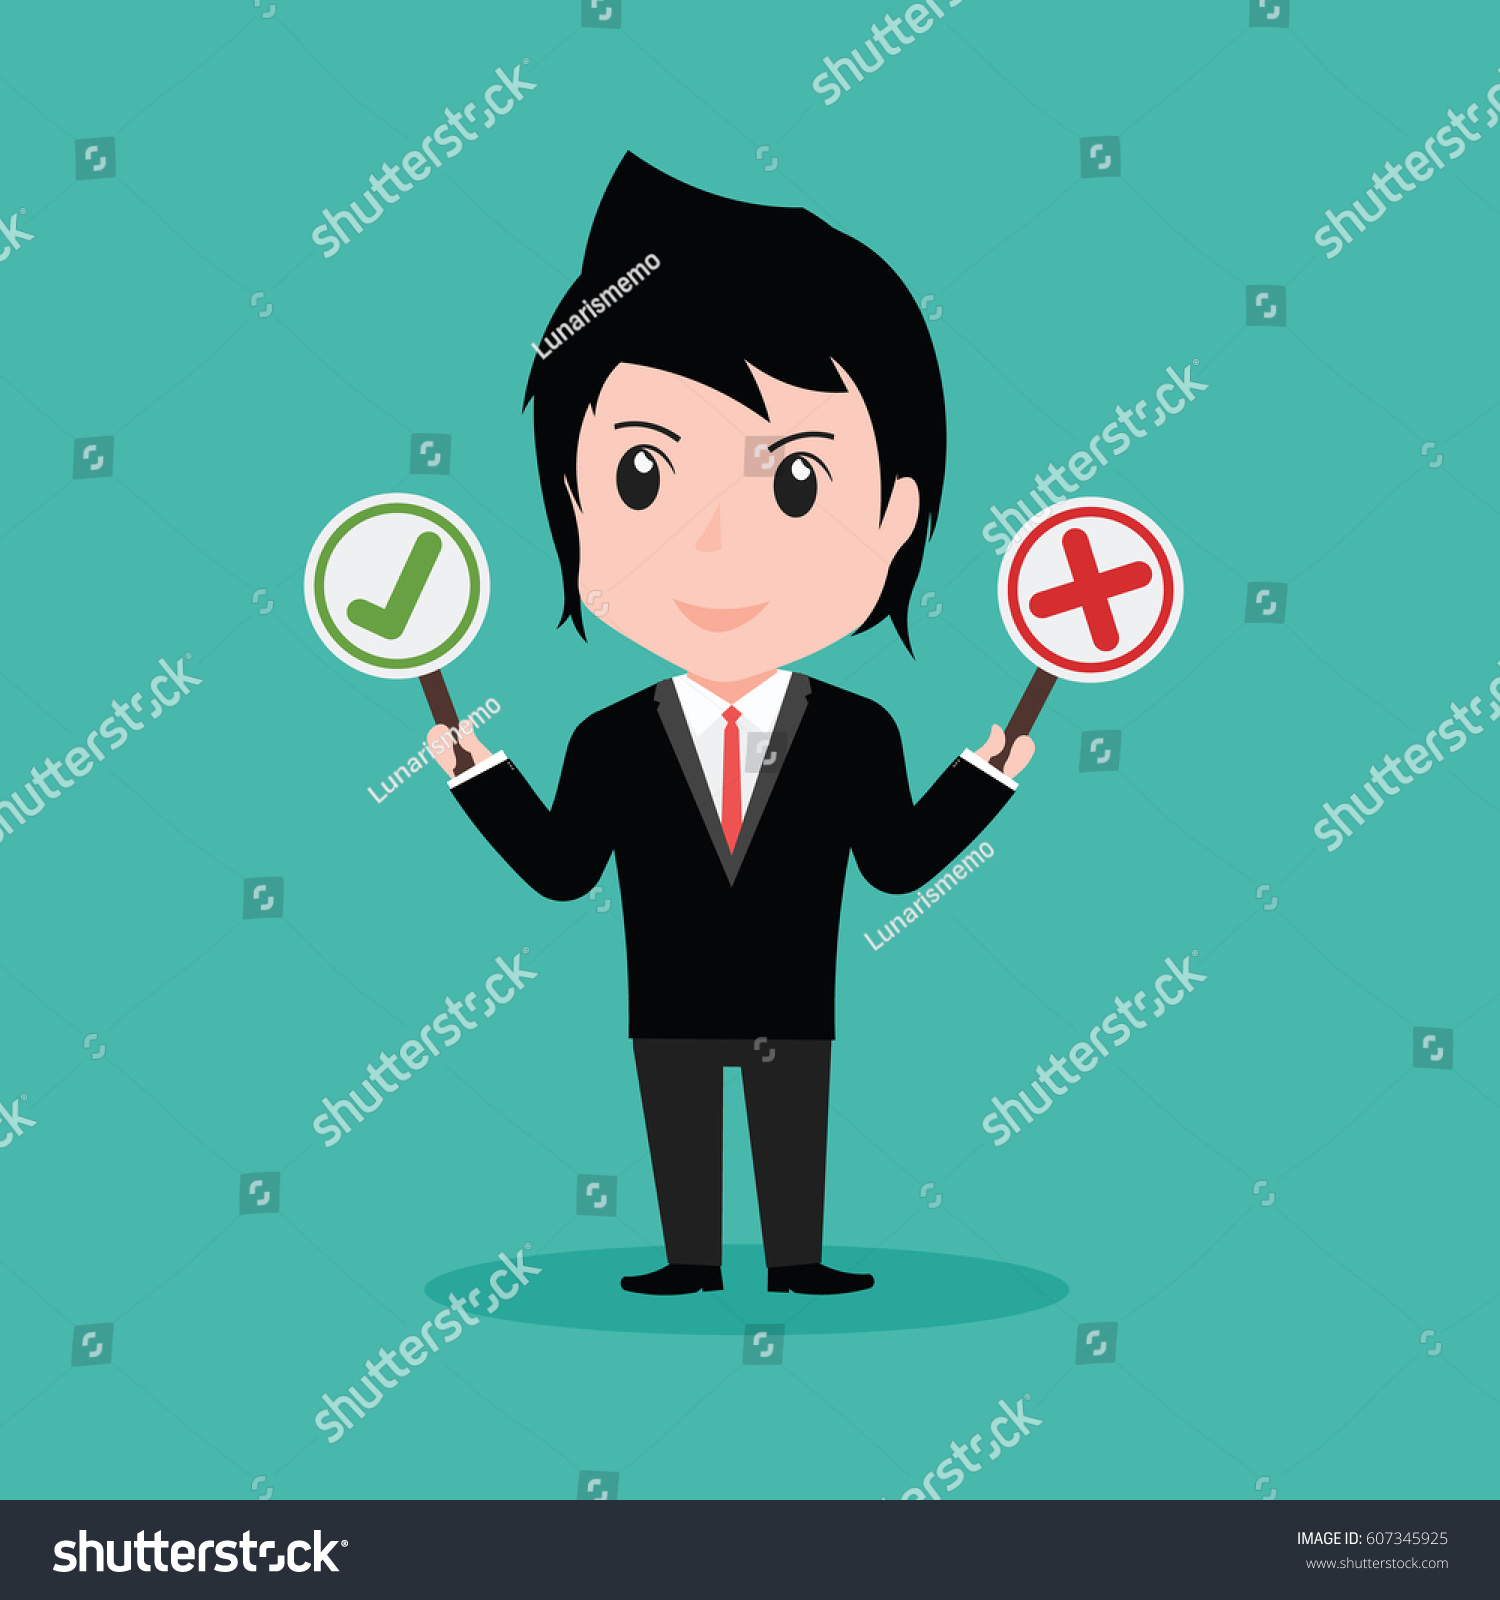 Businessman Holding Right Wrong Signs Cartoon Stock Vector Royalty Free Shutterstock